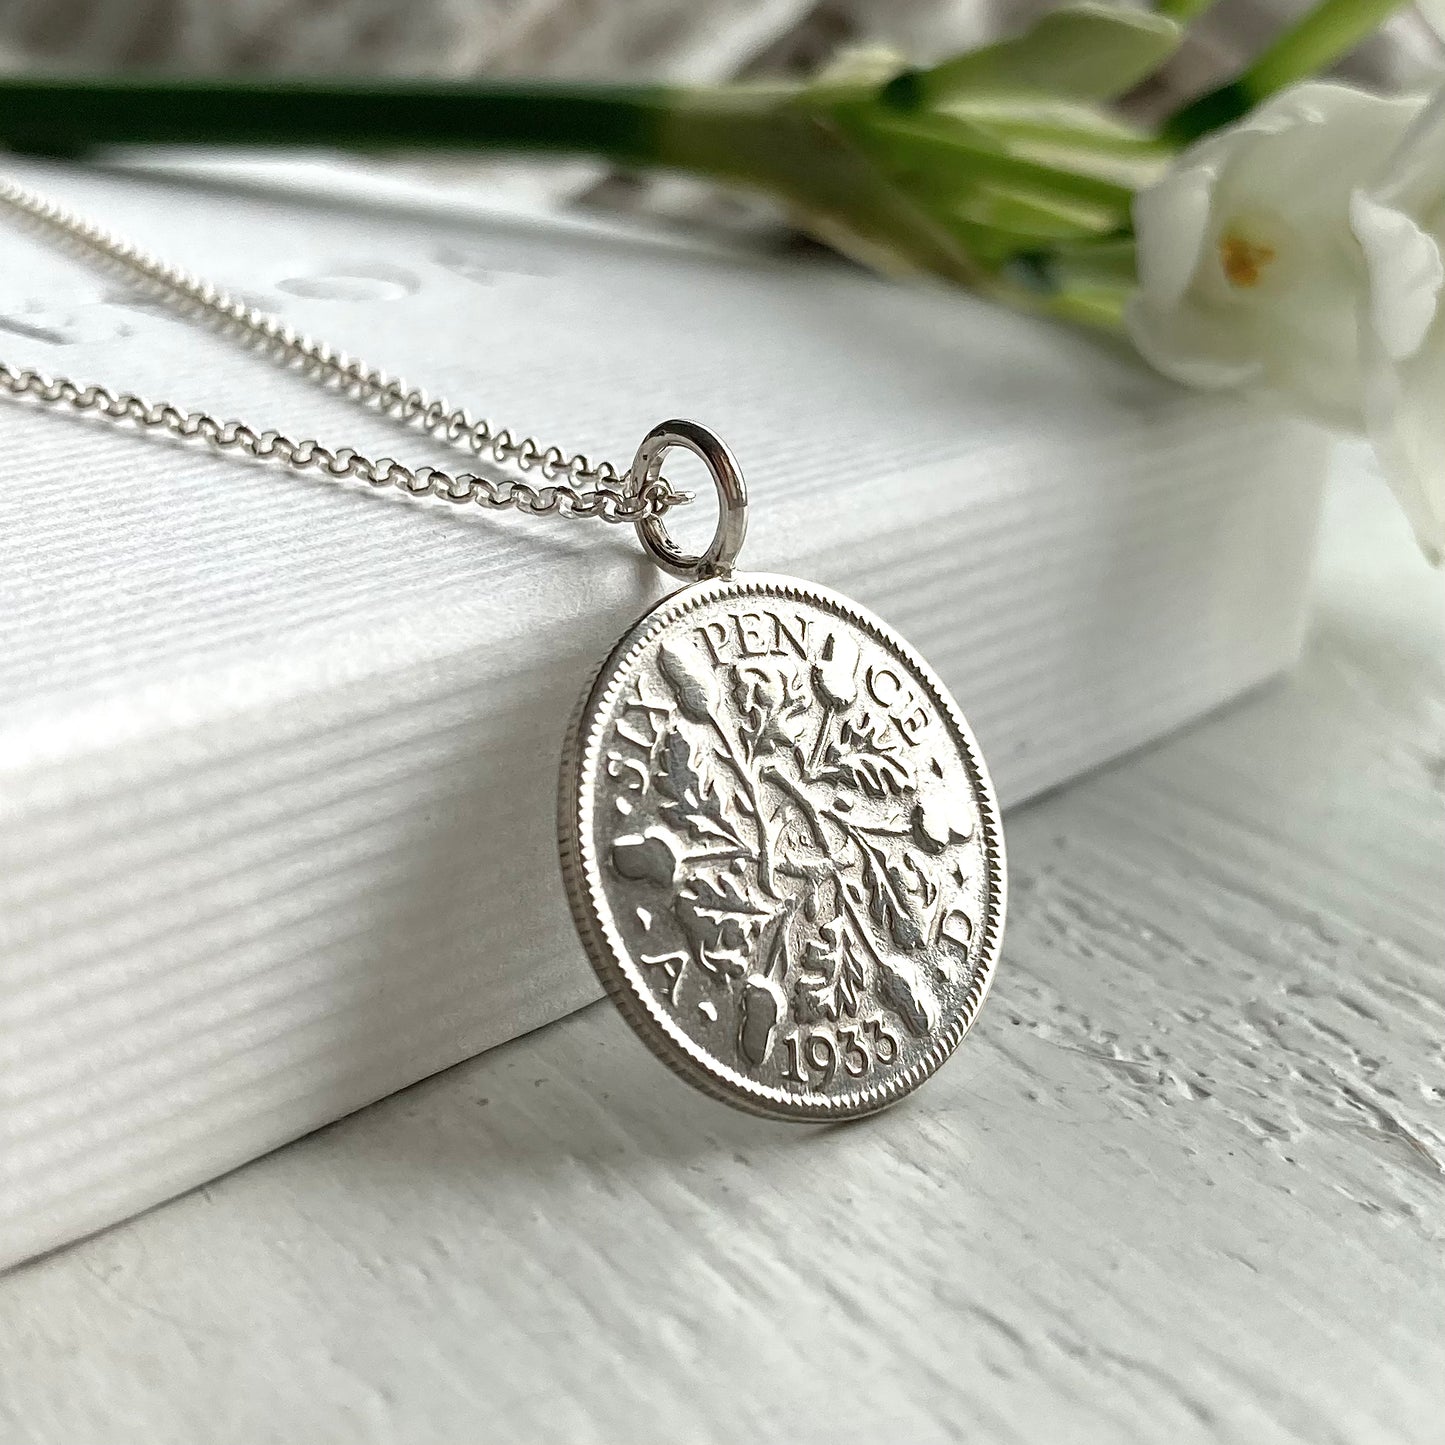 1933 Sixpence Acorns and Oak Leaves - Birthstone Necklace